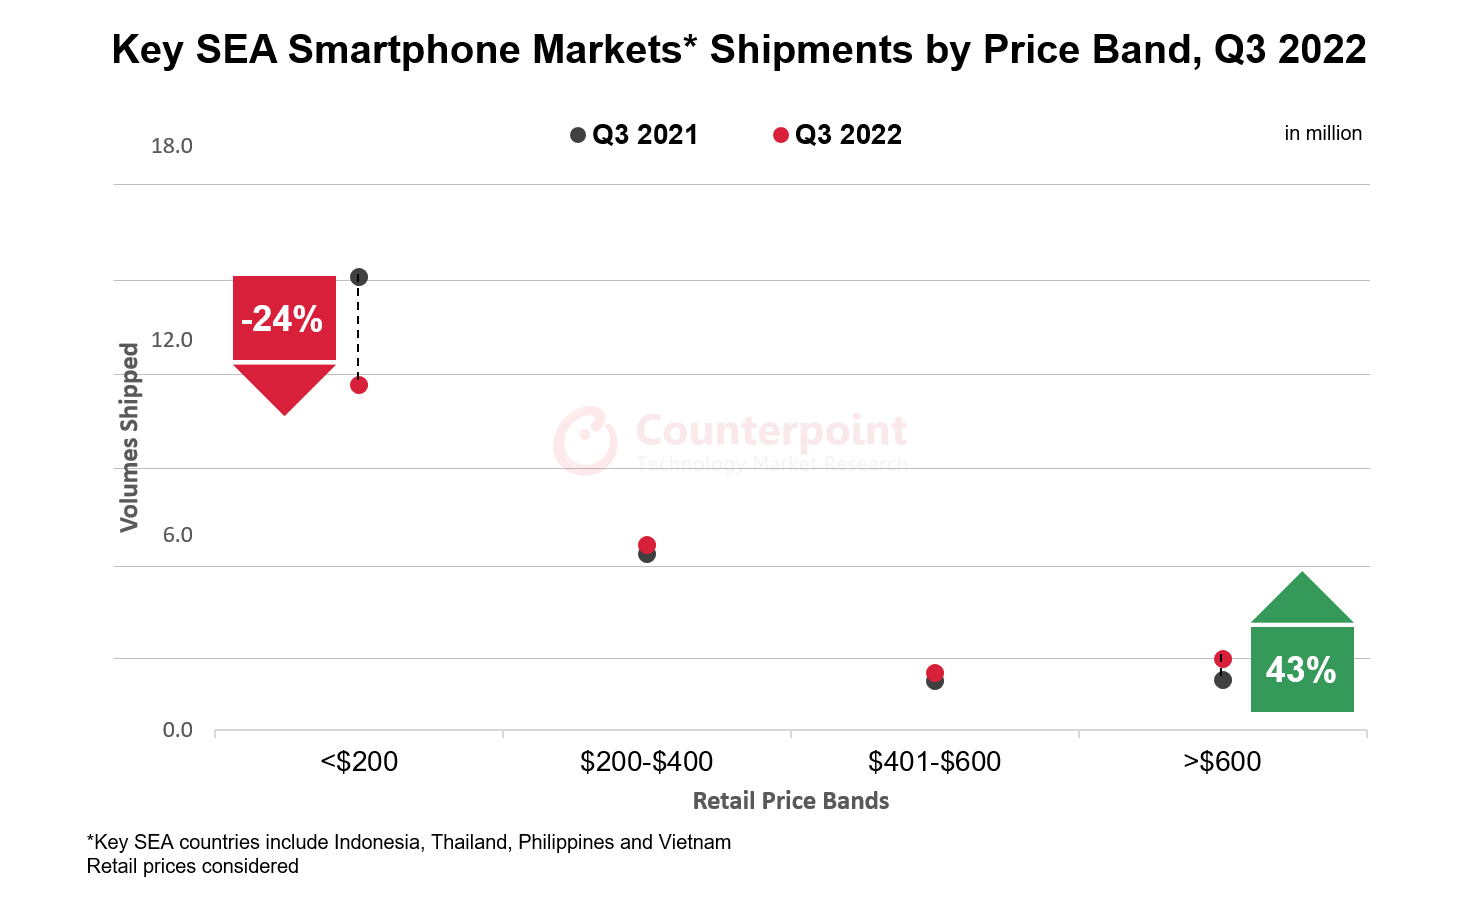 Key SEA Smartphone Markets Shipments by Price Band Q3 2022